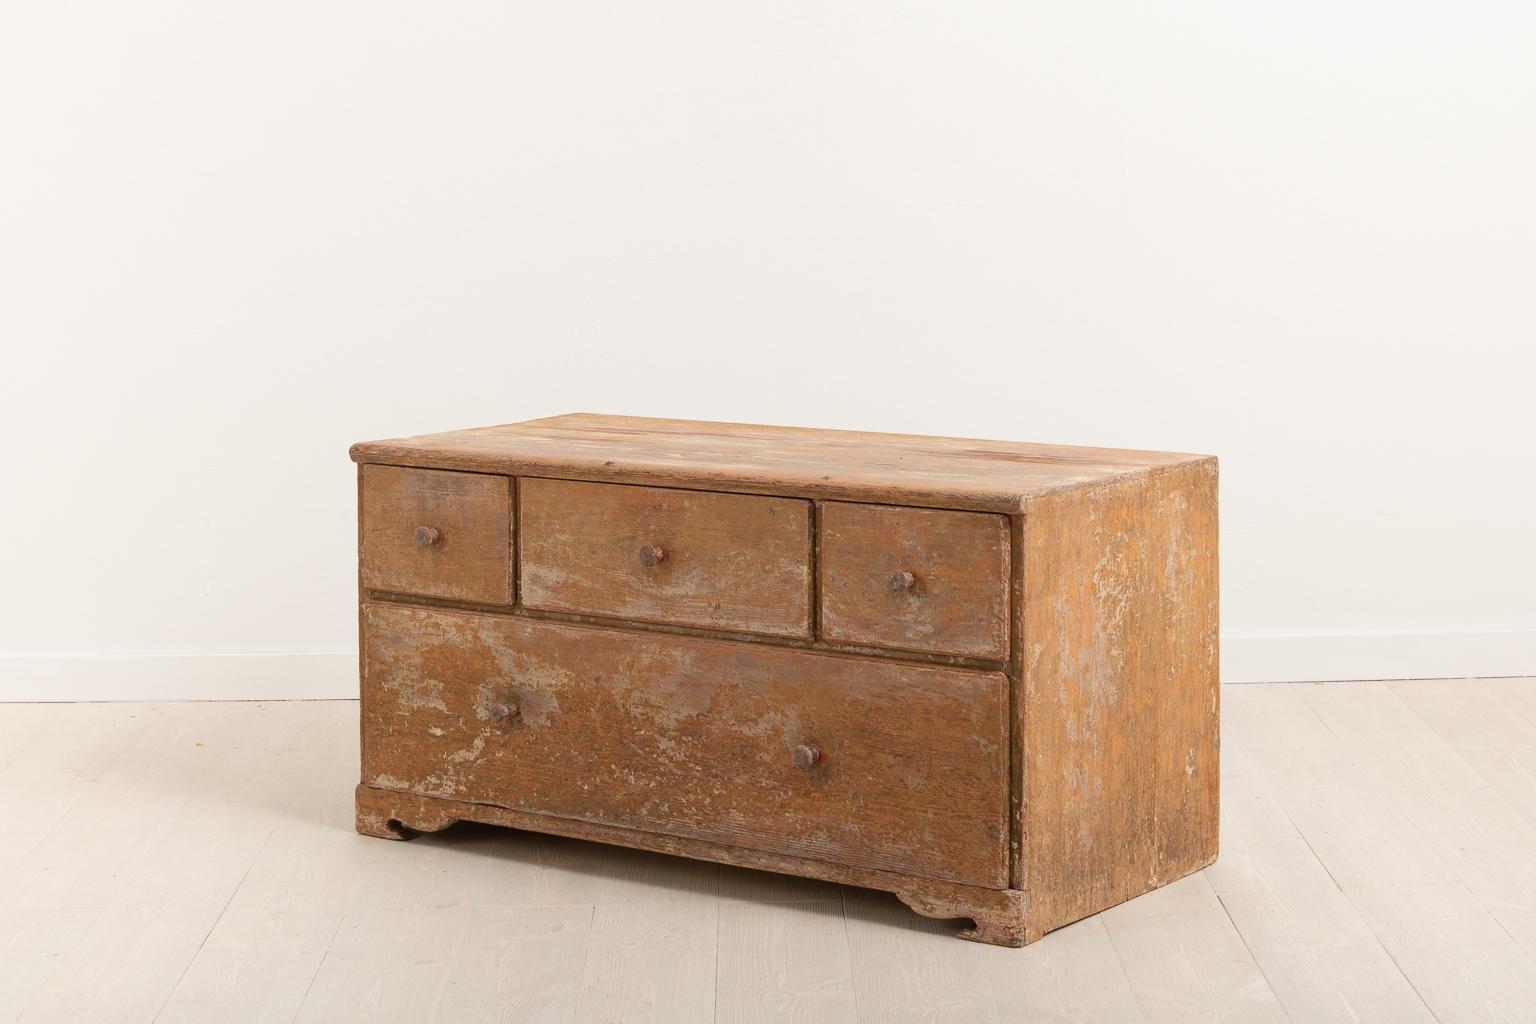 Hand-Crafted 19th Century Swedish Small Chest of Drawers